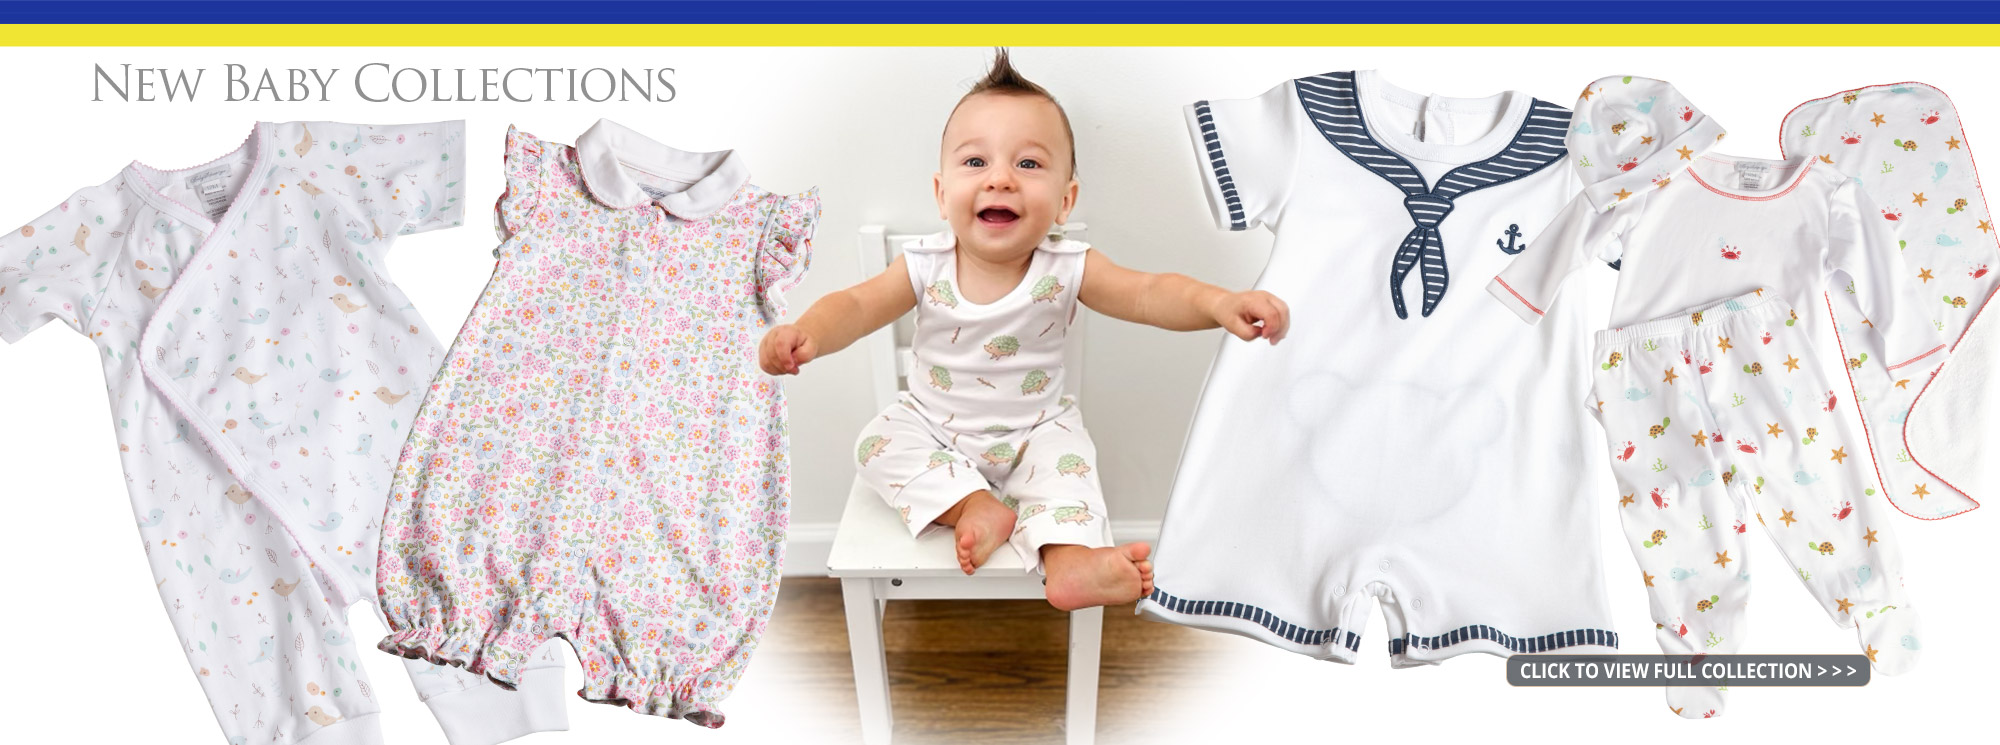 New Baby Collections are Here!